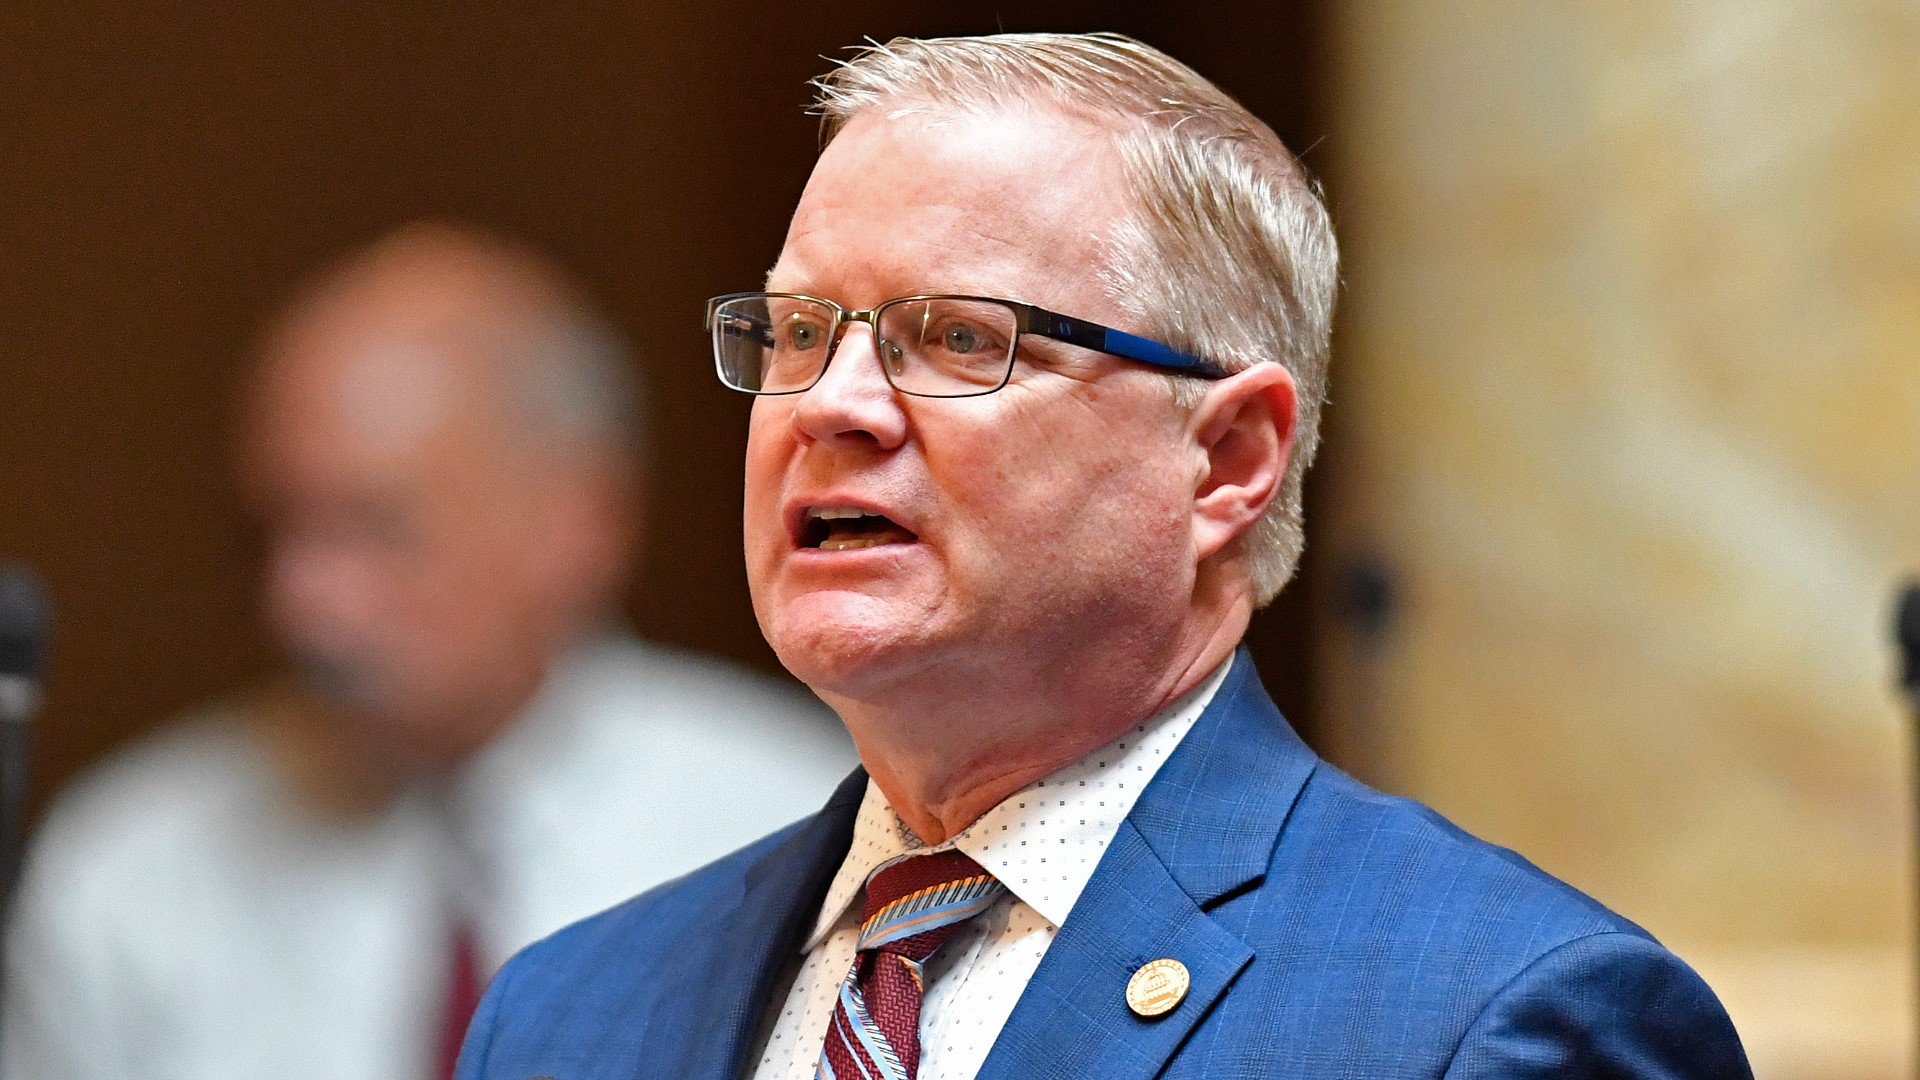 After over two decades of service to his district and a decade as Senate Majority Floor Leader, Thayer will finish his term in December 2024.